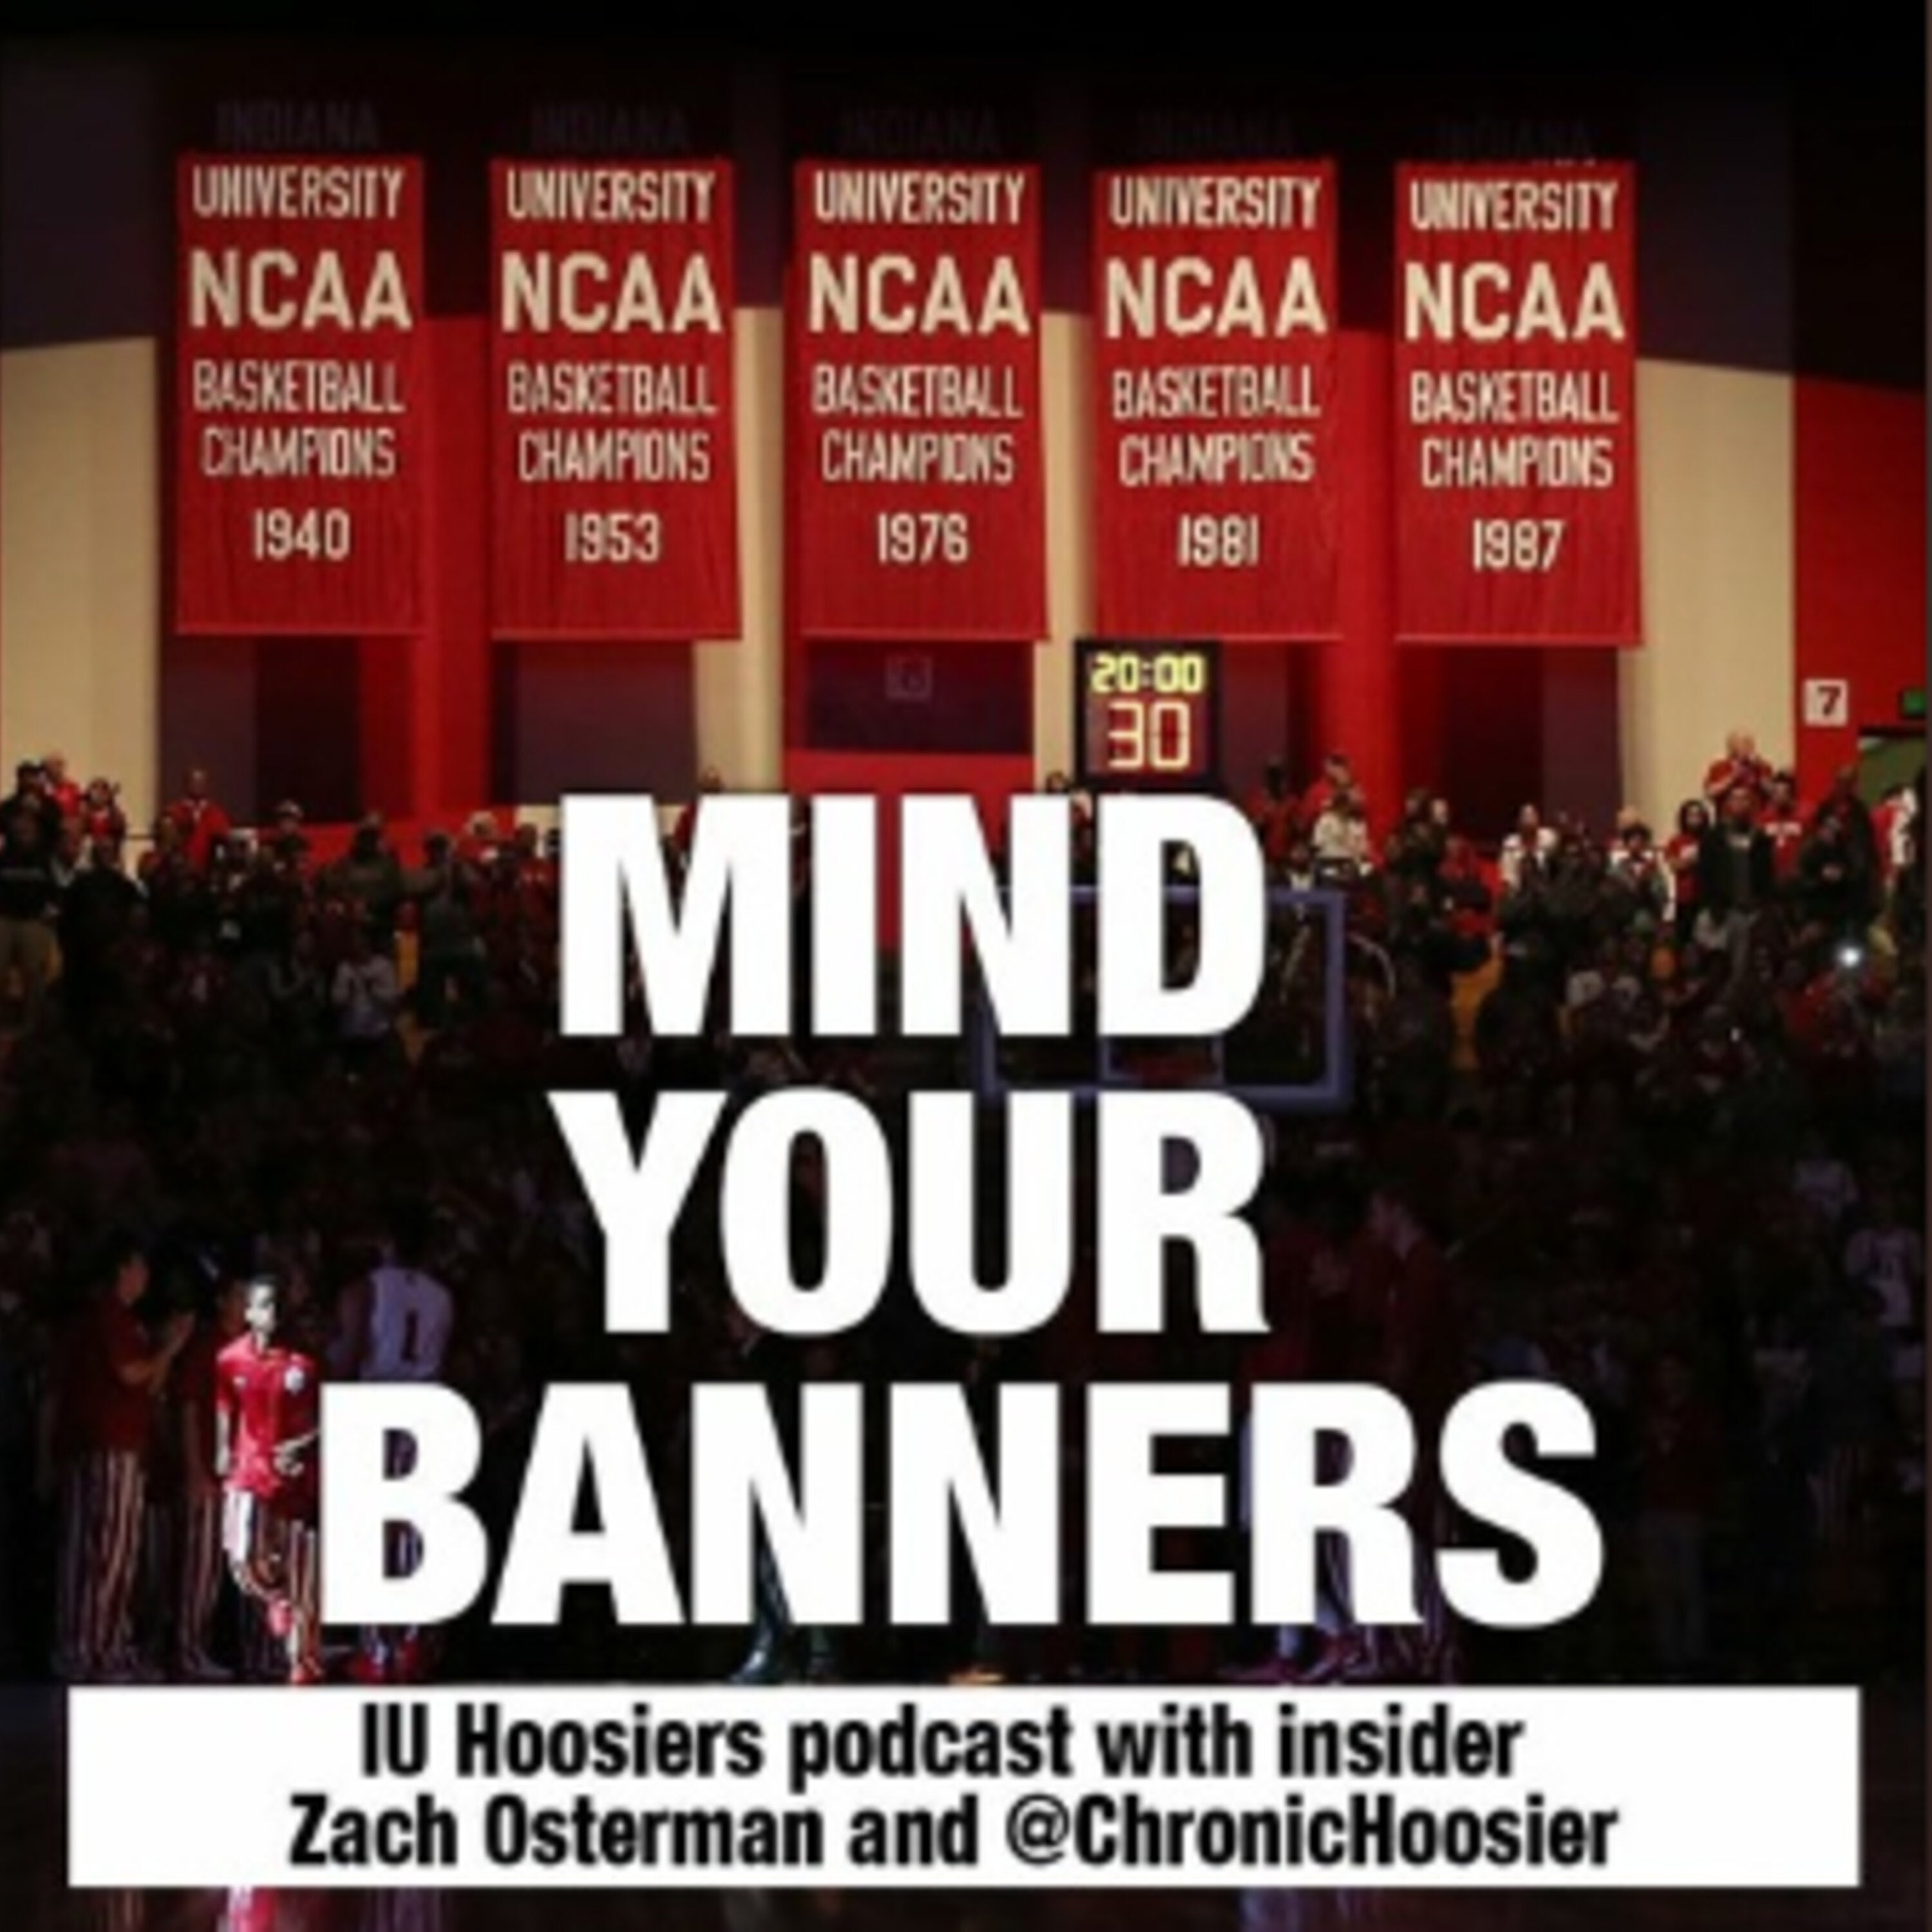 Mind Your Banners: Learning from Louisville loss paramount for IU